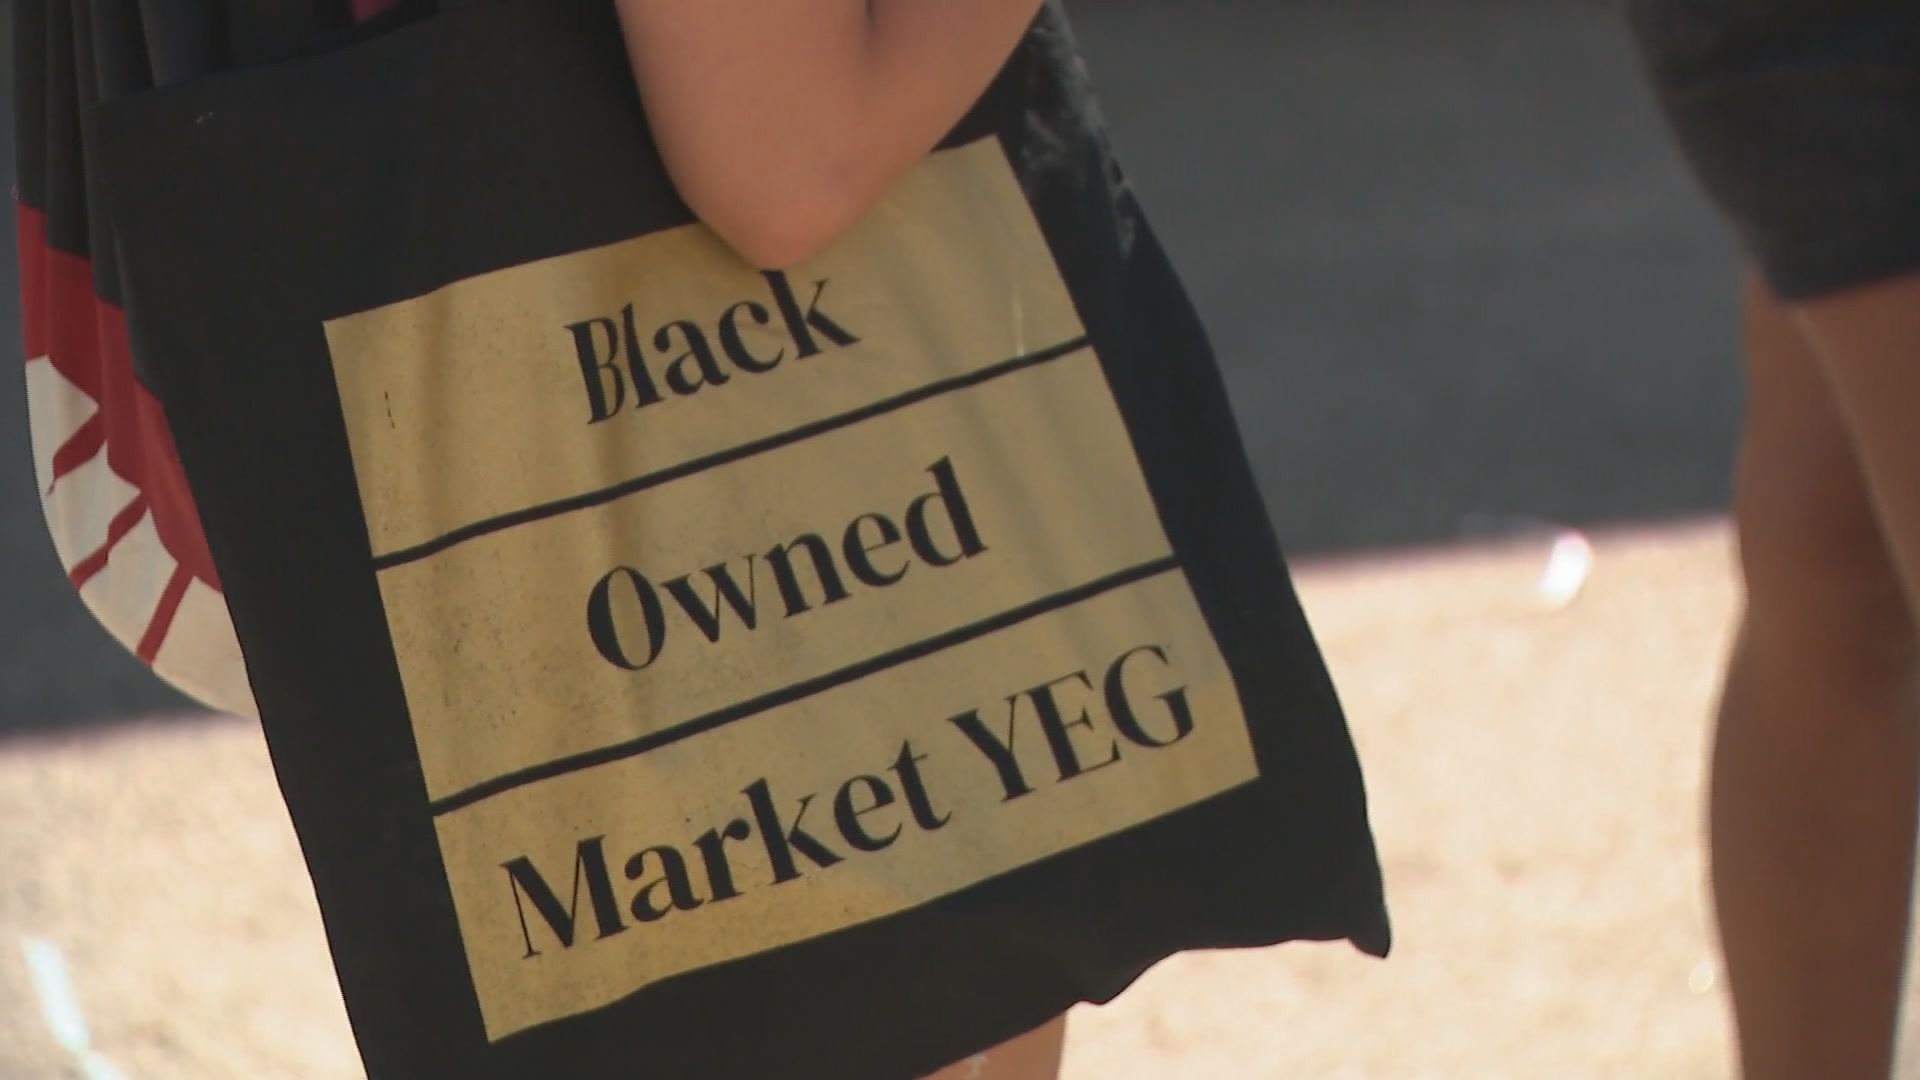 The Black-Owned Market